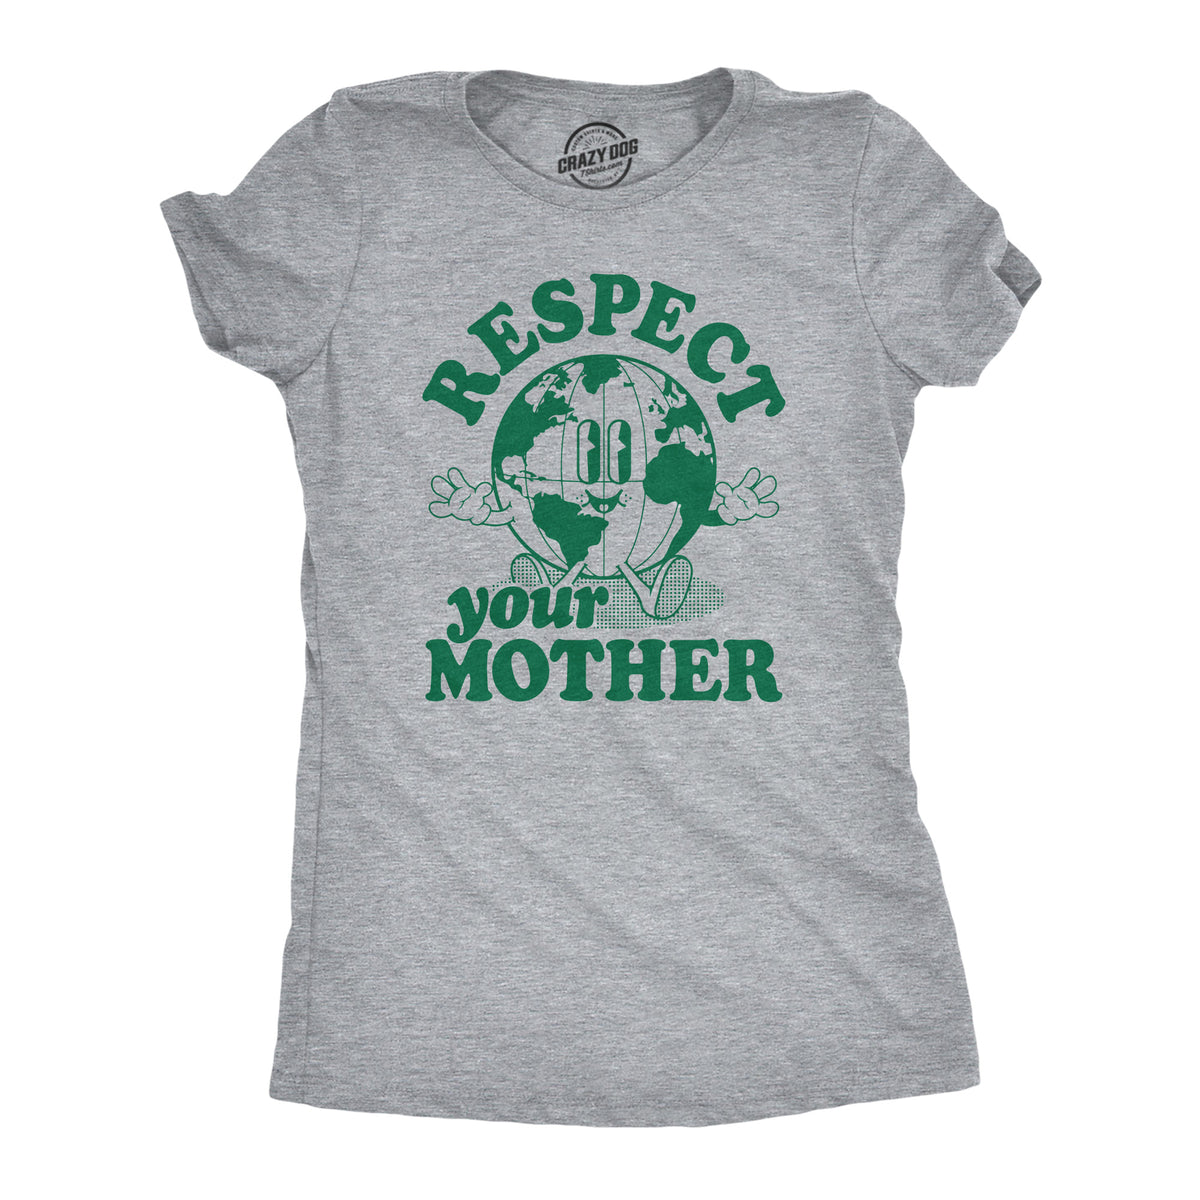 Funny Light Heather Grey - Respect V2 Respect Your Mother Womens T Shirt Nerdy Earth Tee